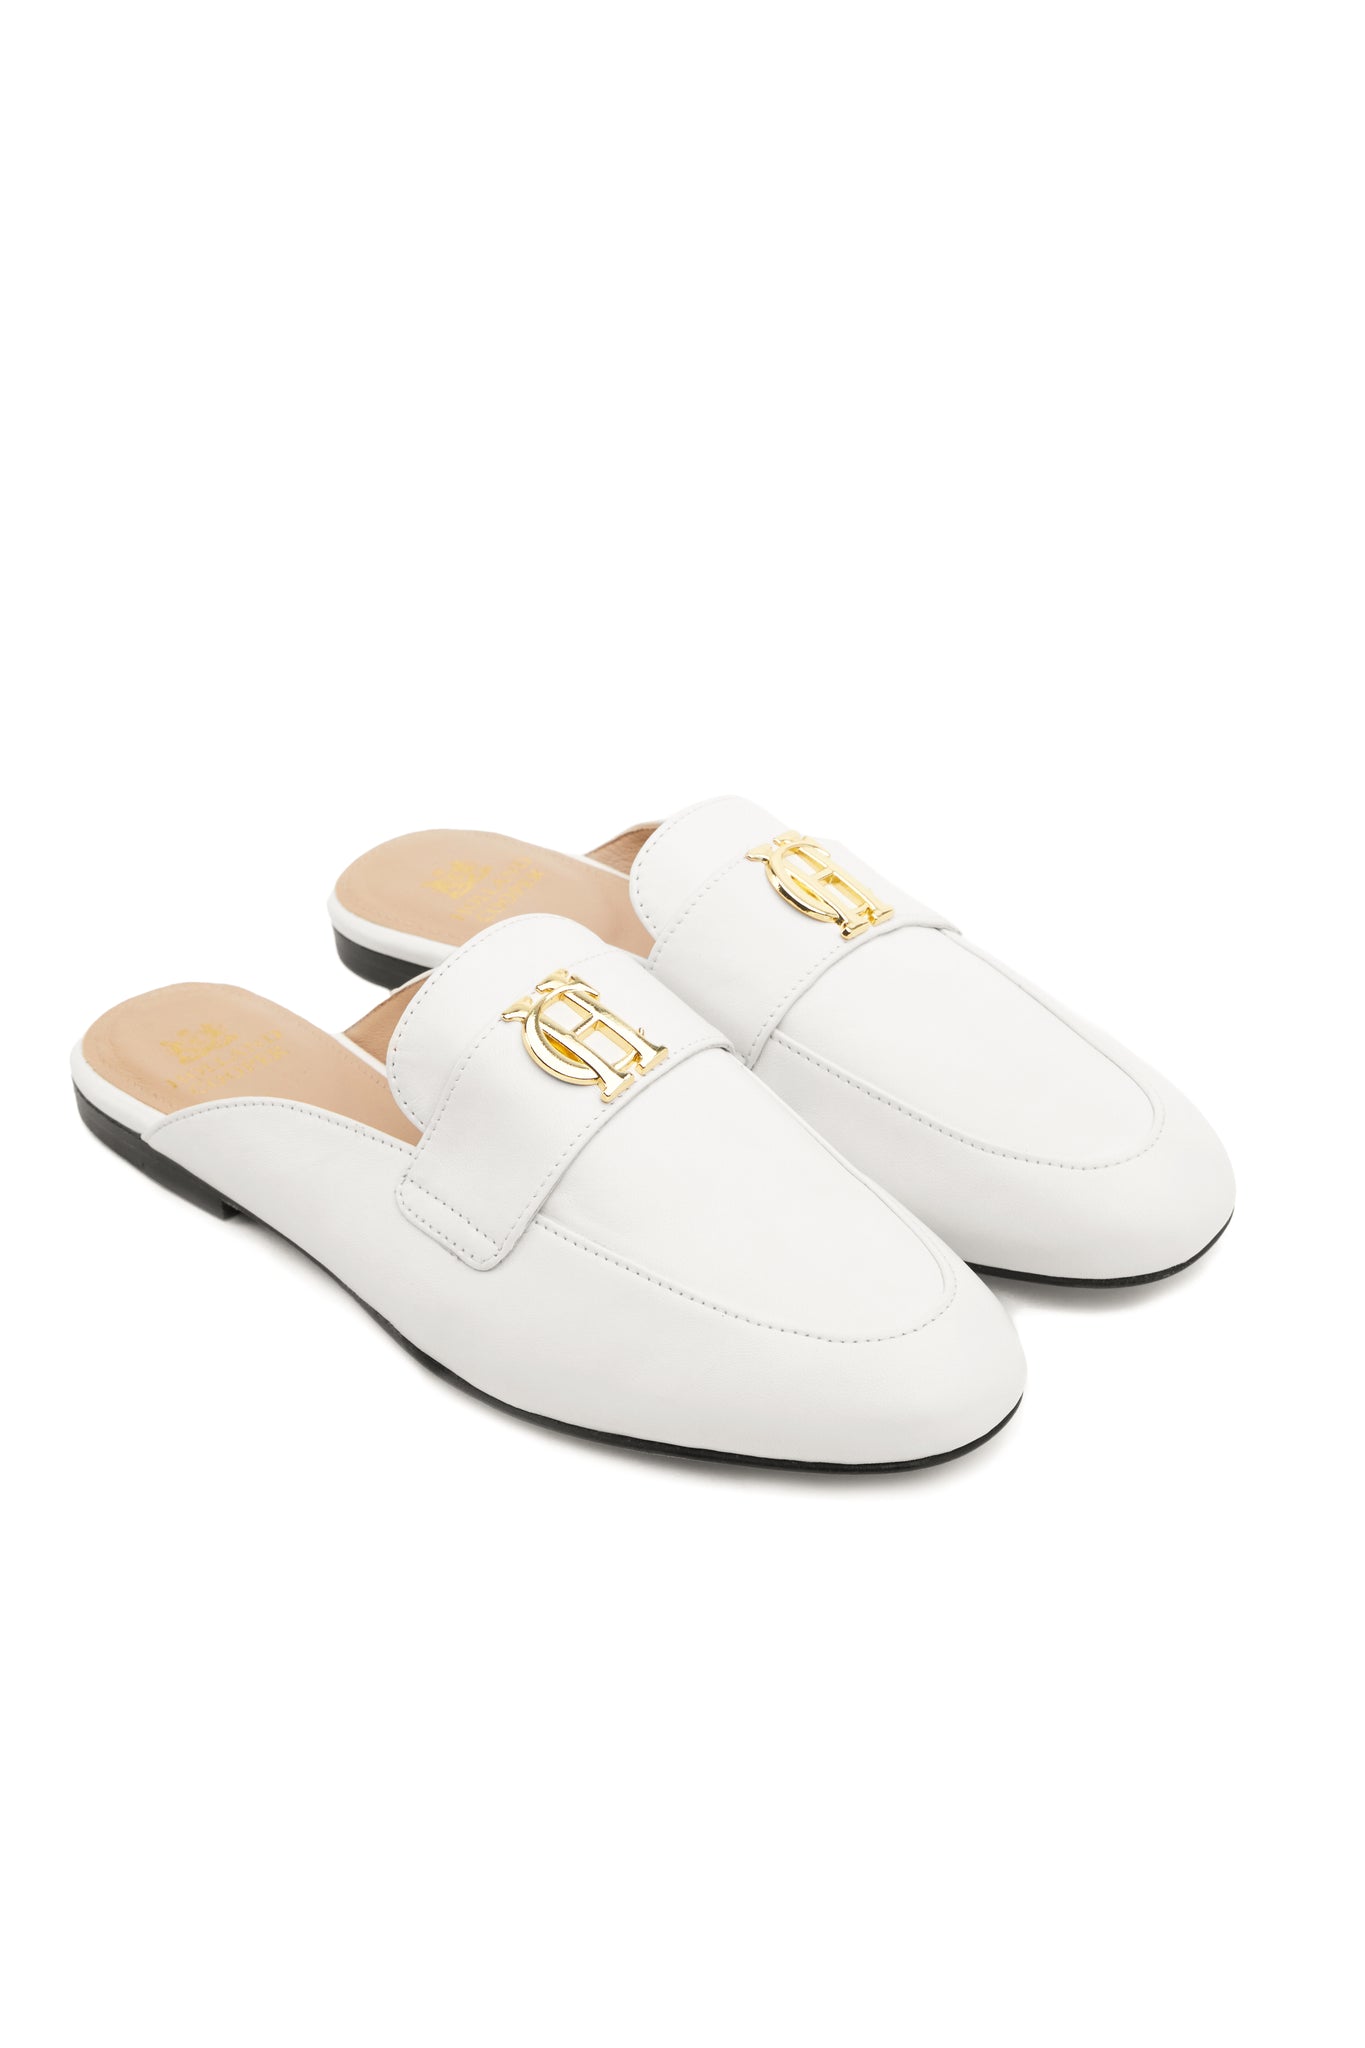 white leather backless loafers with a slightly pointed toe and gold hardware to the top